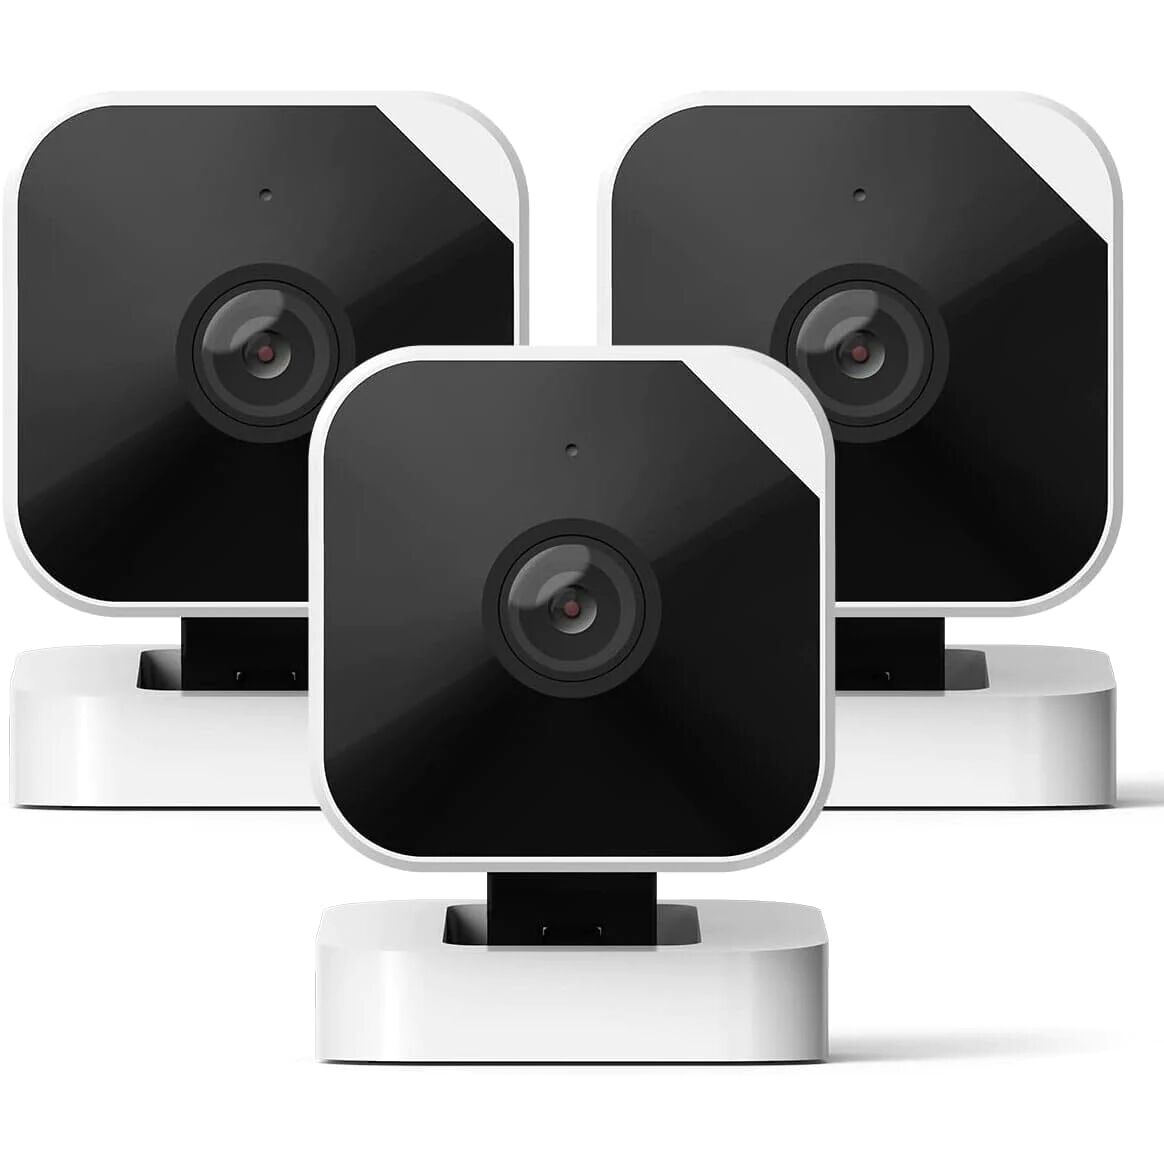 DailySale 3-Pack: Abode Cam 2   IndoorOutdoor WiFi Connected Security Camera with Full Color Low-Light Video, Motion Detection, and Two-Way Voice (Refurbished)